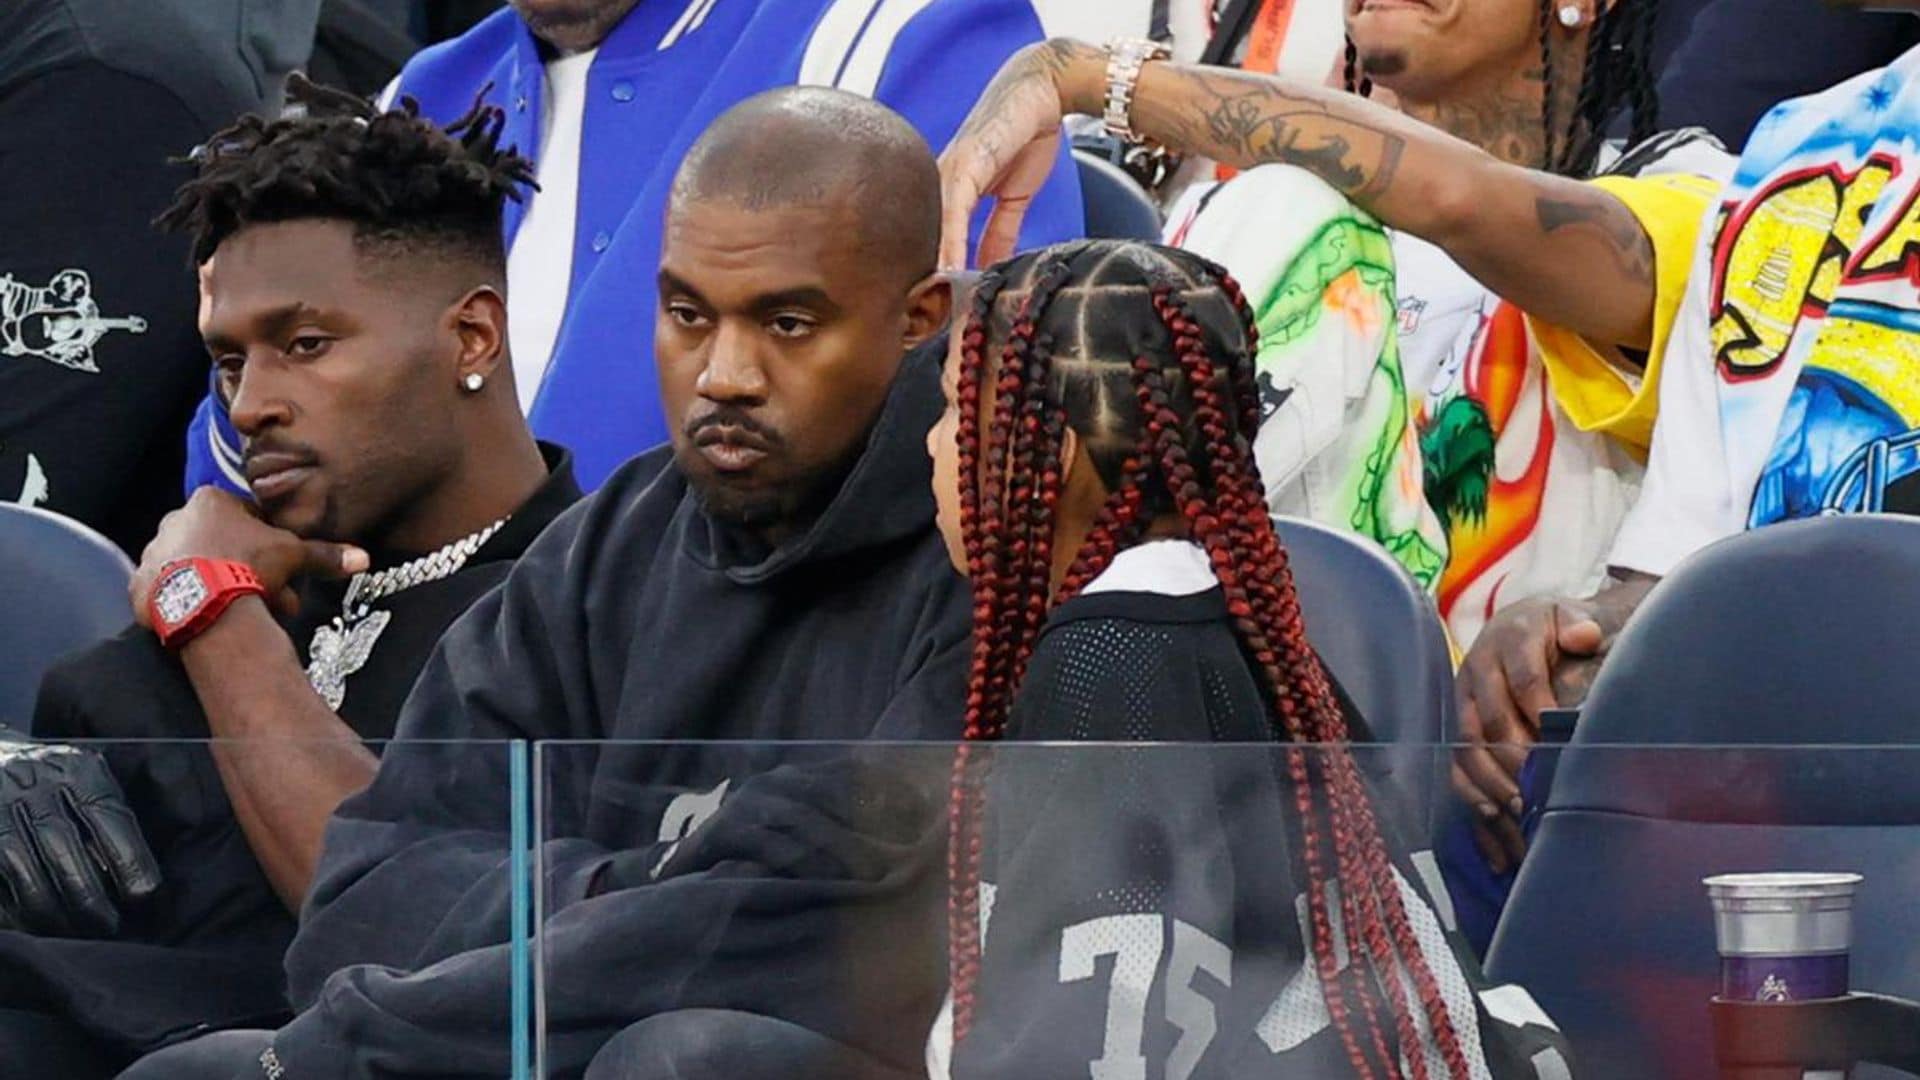 Kanye West takes North and Saint to Super Bowl 2022 after taking shots at Pete Davidson on Instagram